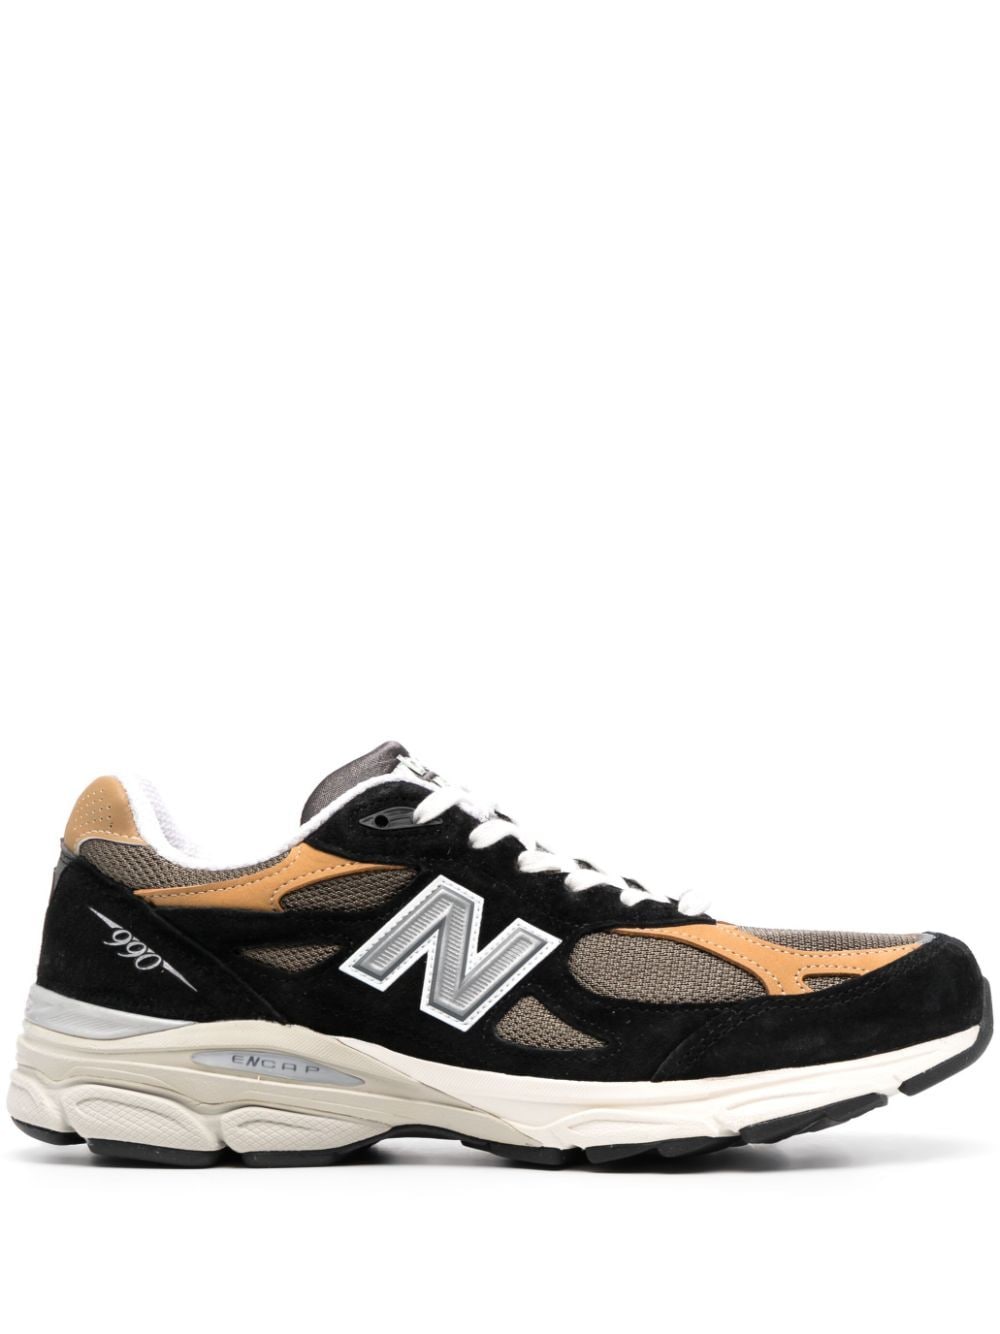 New Balance 990V3 "Made In Usa" sneakers - Black